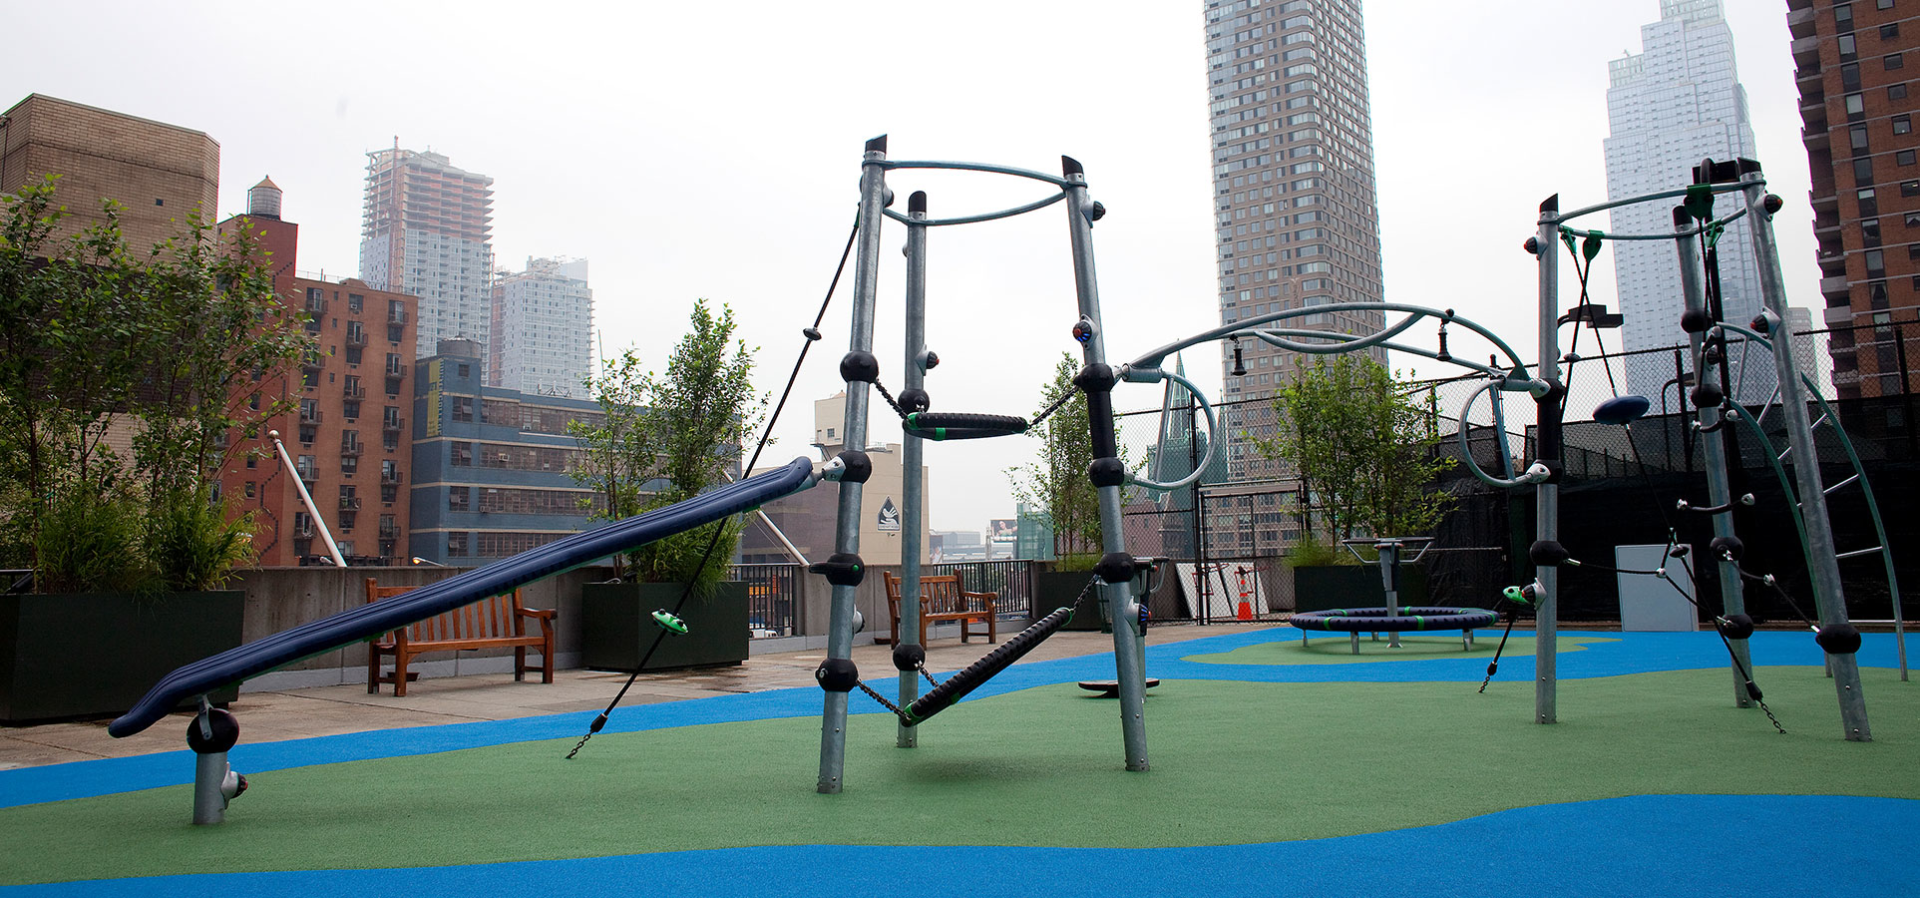 park with play systems with a futuristic design, designed for teenagers